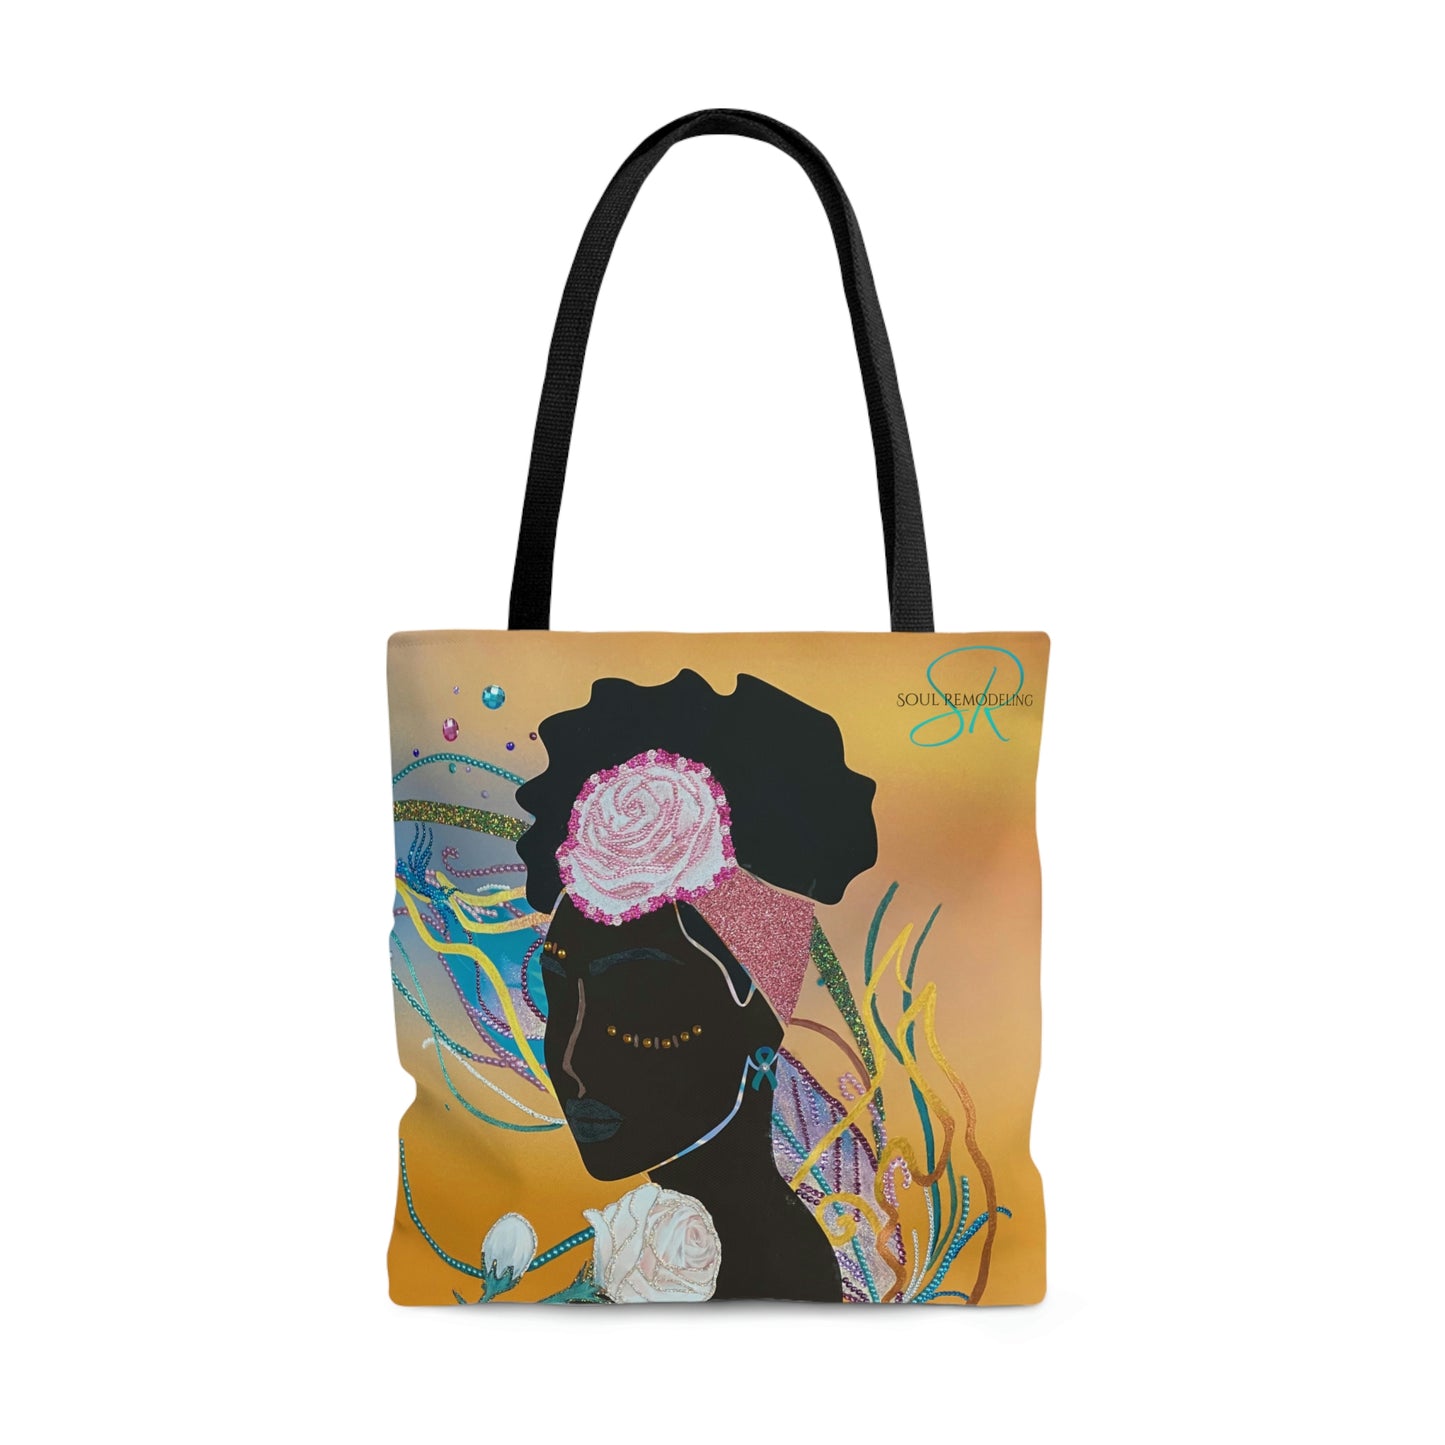 "Empowered" Tote Bag